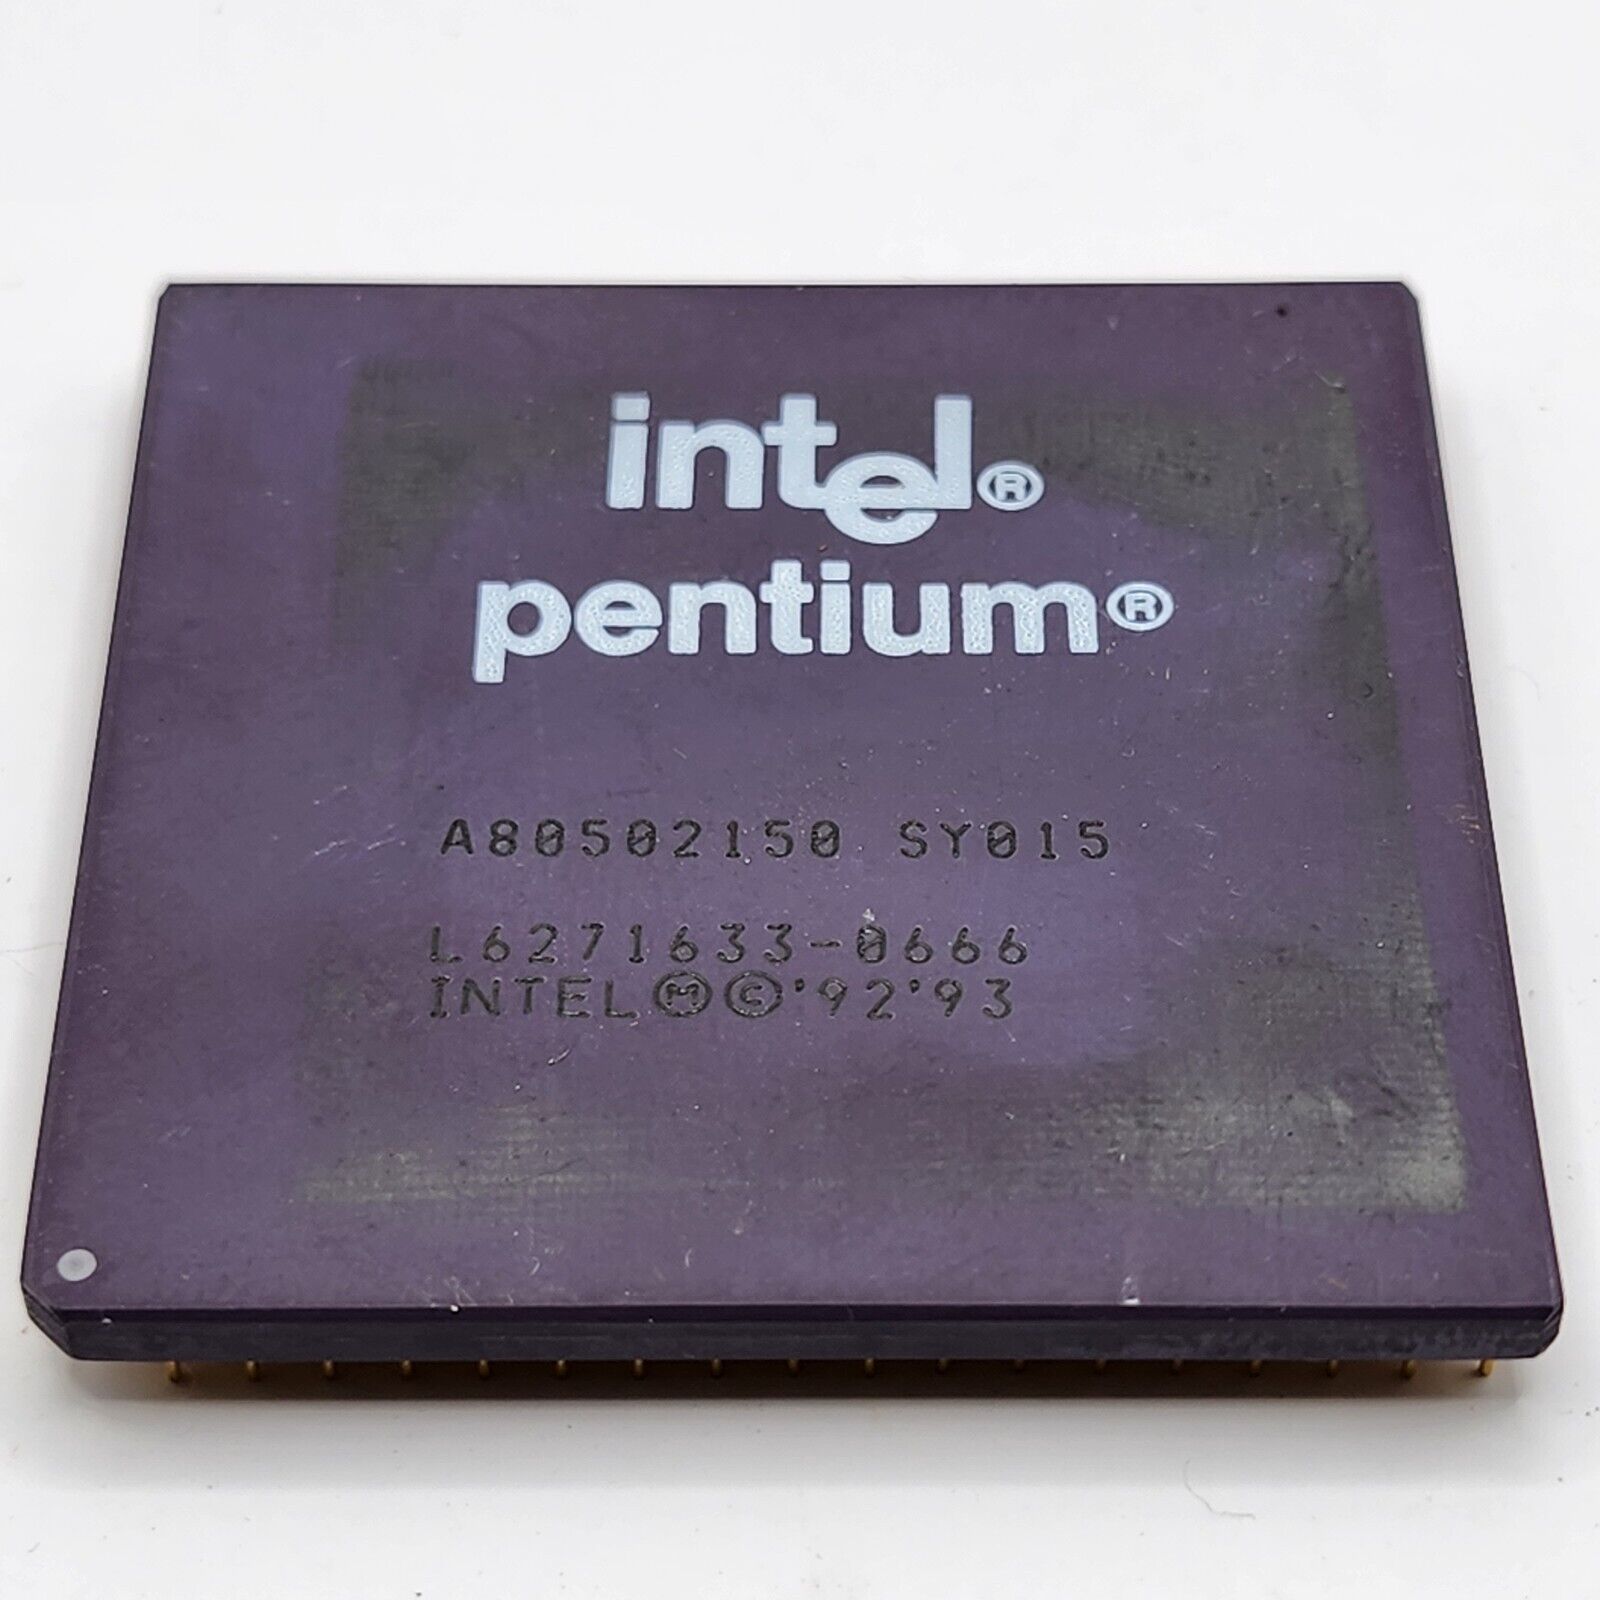 Vintage Intel Pentium 166 MHz A80502166 SY016 Socket 5 & 7 - Collectable - Gold